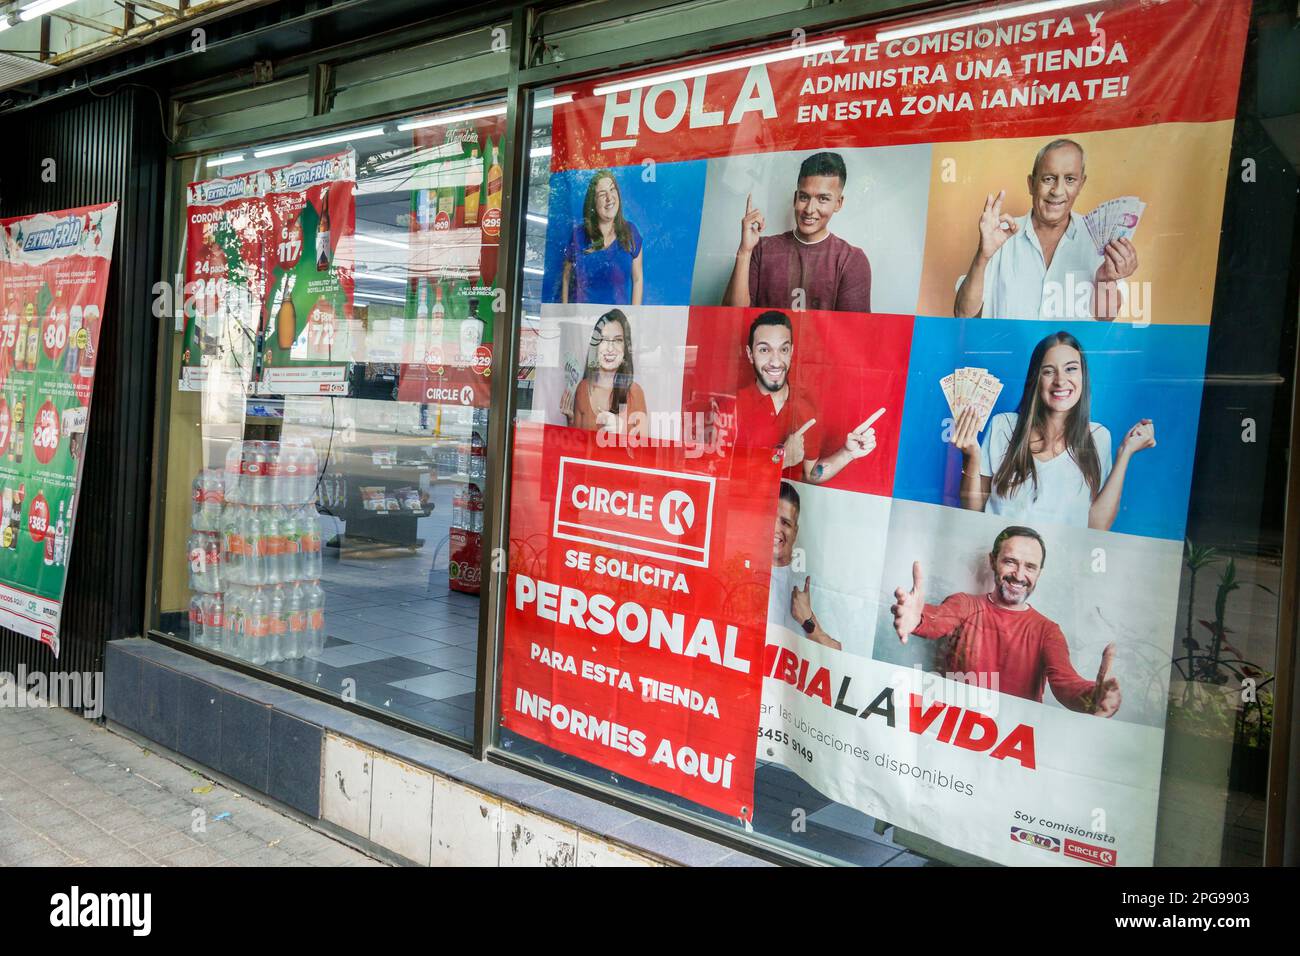 Mexico City,Circle K,personnel hiring employment,man men male,woman women lady female,adult adults,outside exterior,building buildings,front entrance, Stock Photo